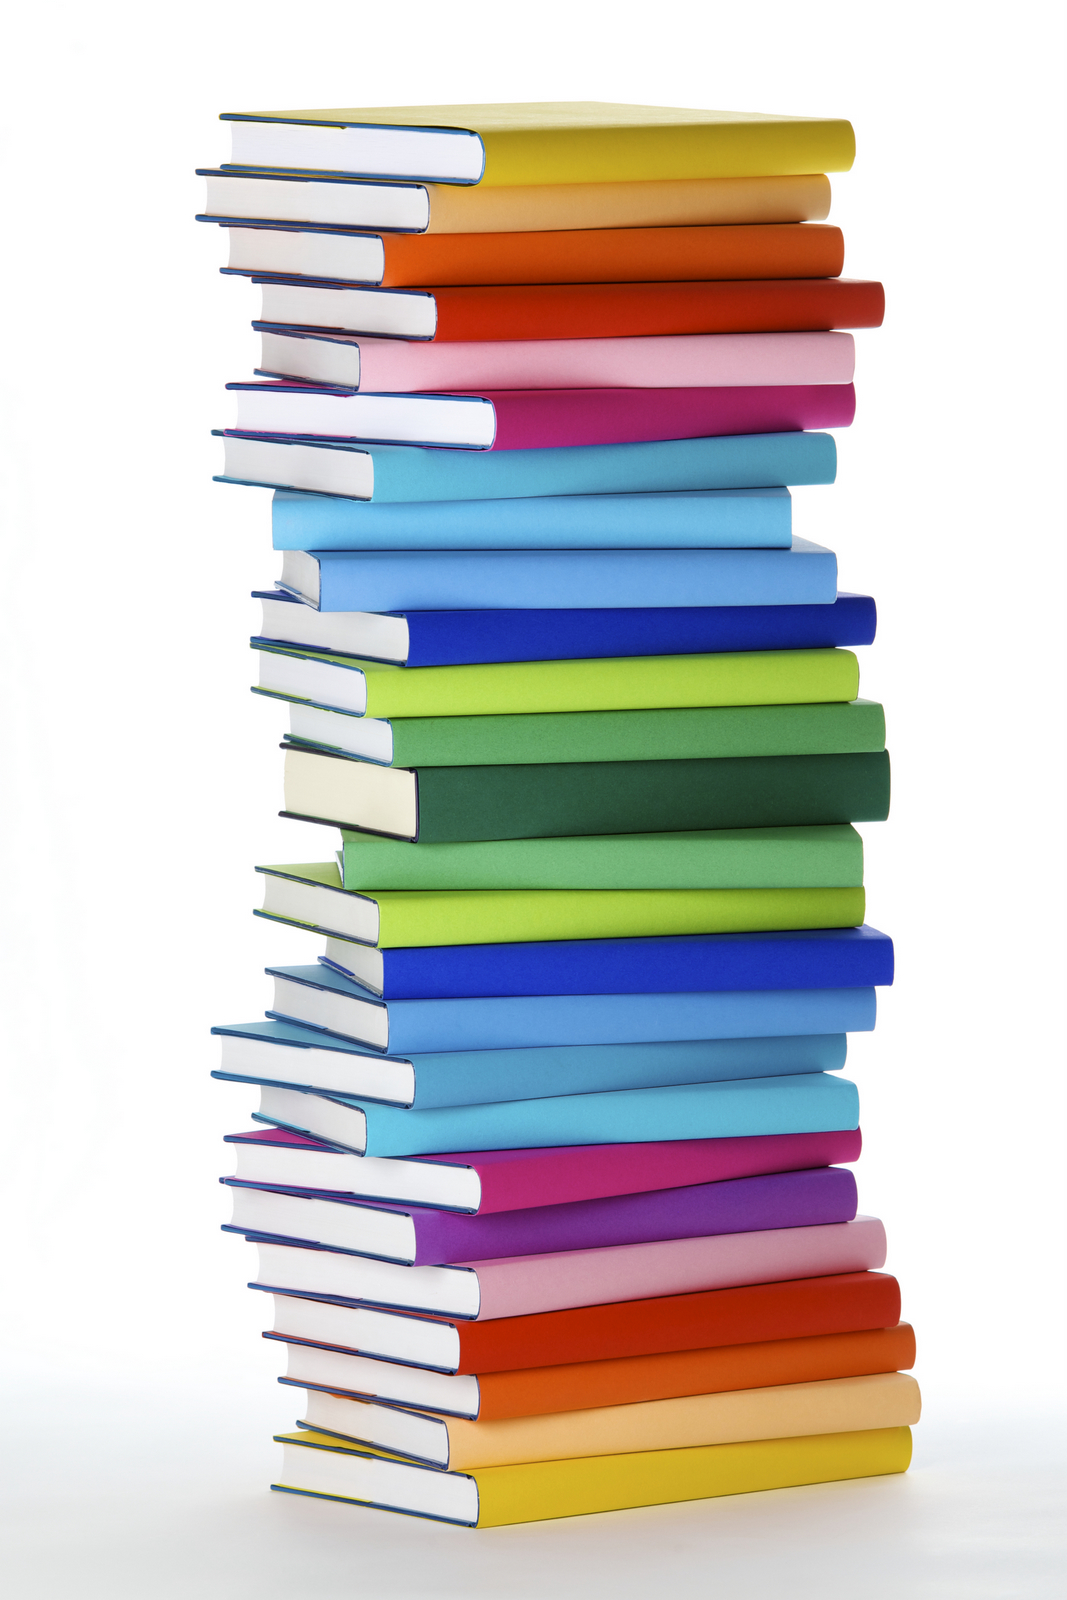 free book stack clipart - photo #32